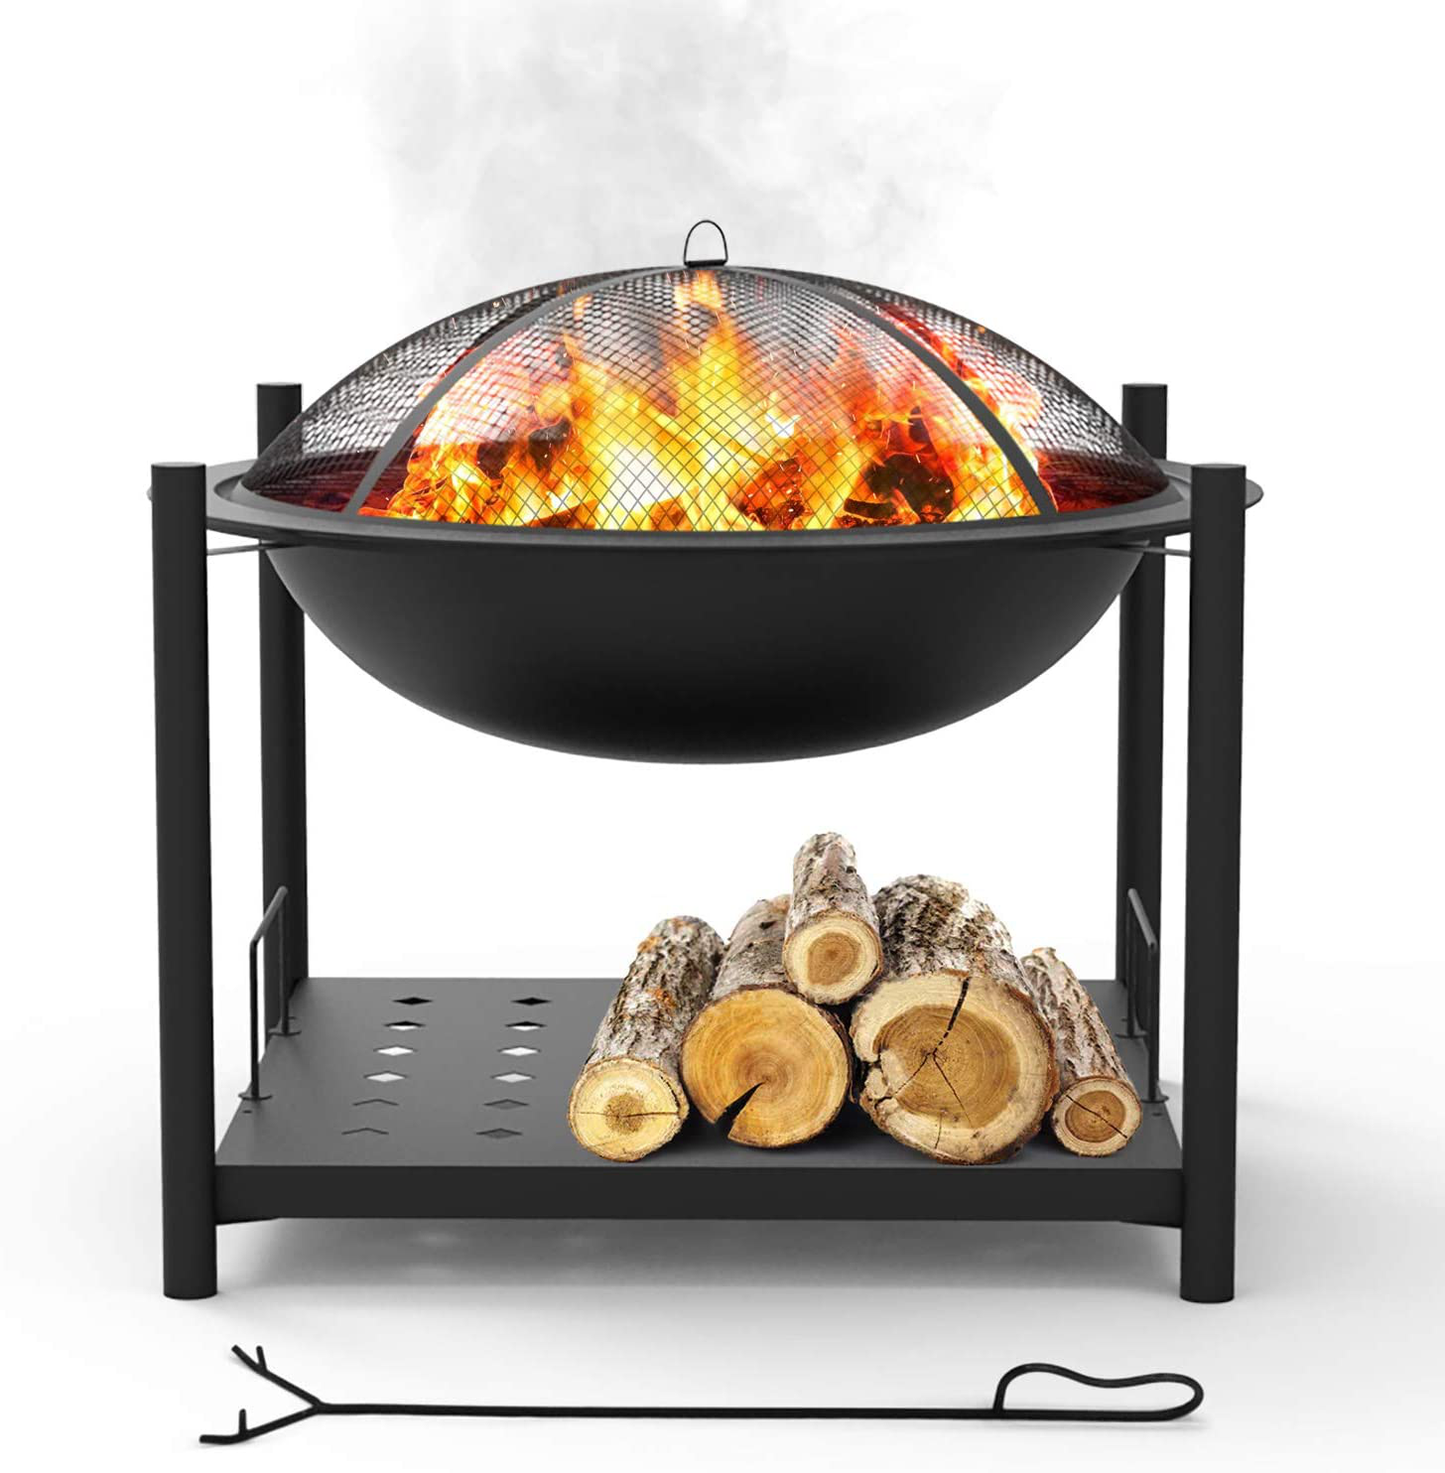 Portable Outdoor Wood Fire Pit - 2-in-1 Steel BBQ Grill 26" Wood Burning Fire Pit Bowl w/ Mesh Spark Screen, Cover Log Grate, Wood Fire Poker for Camping, Picnic, Bonfire - SereneLife SLCARFP54